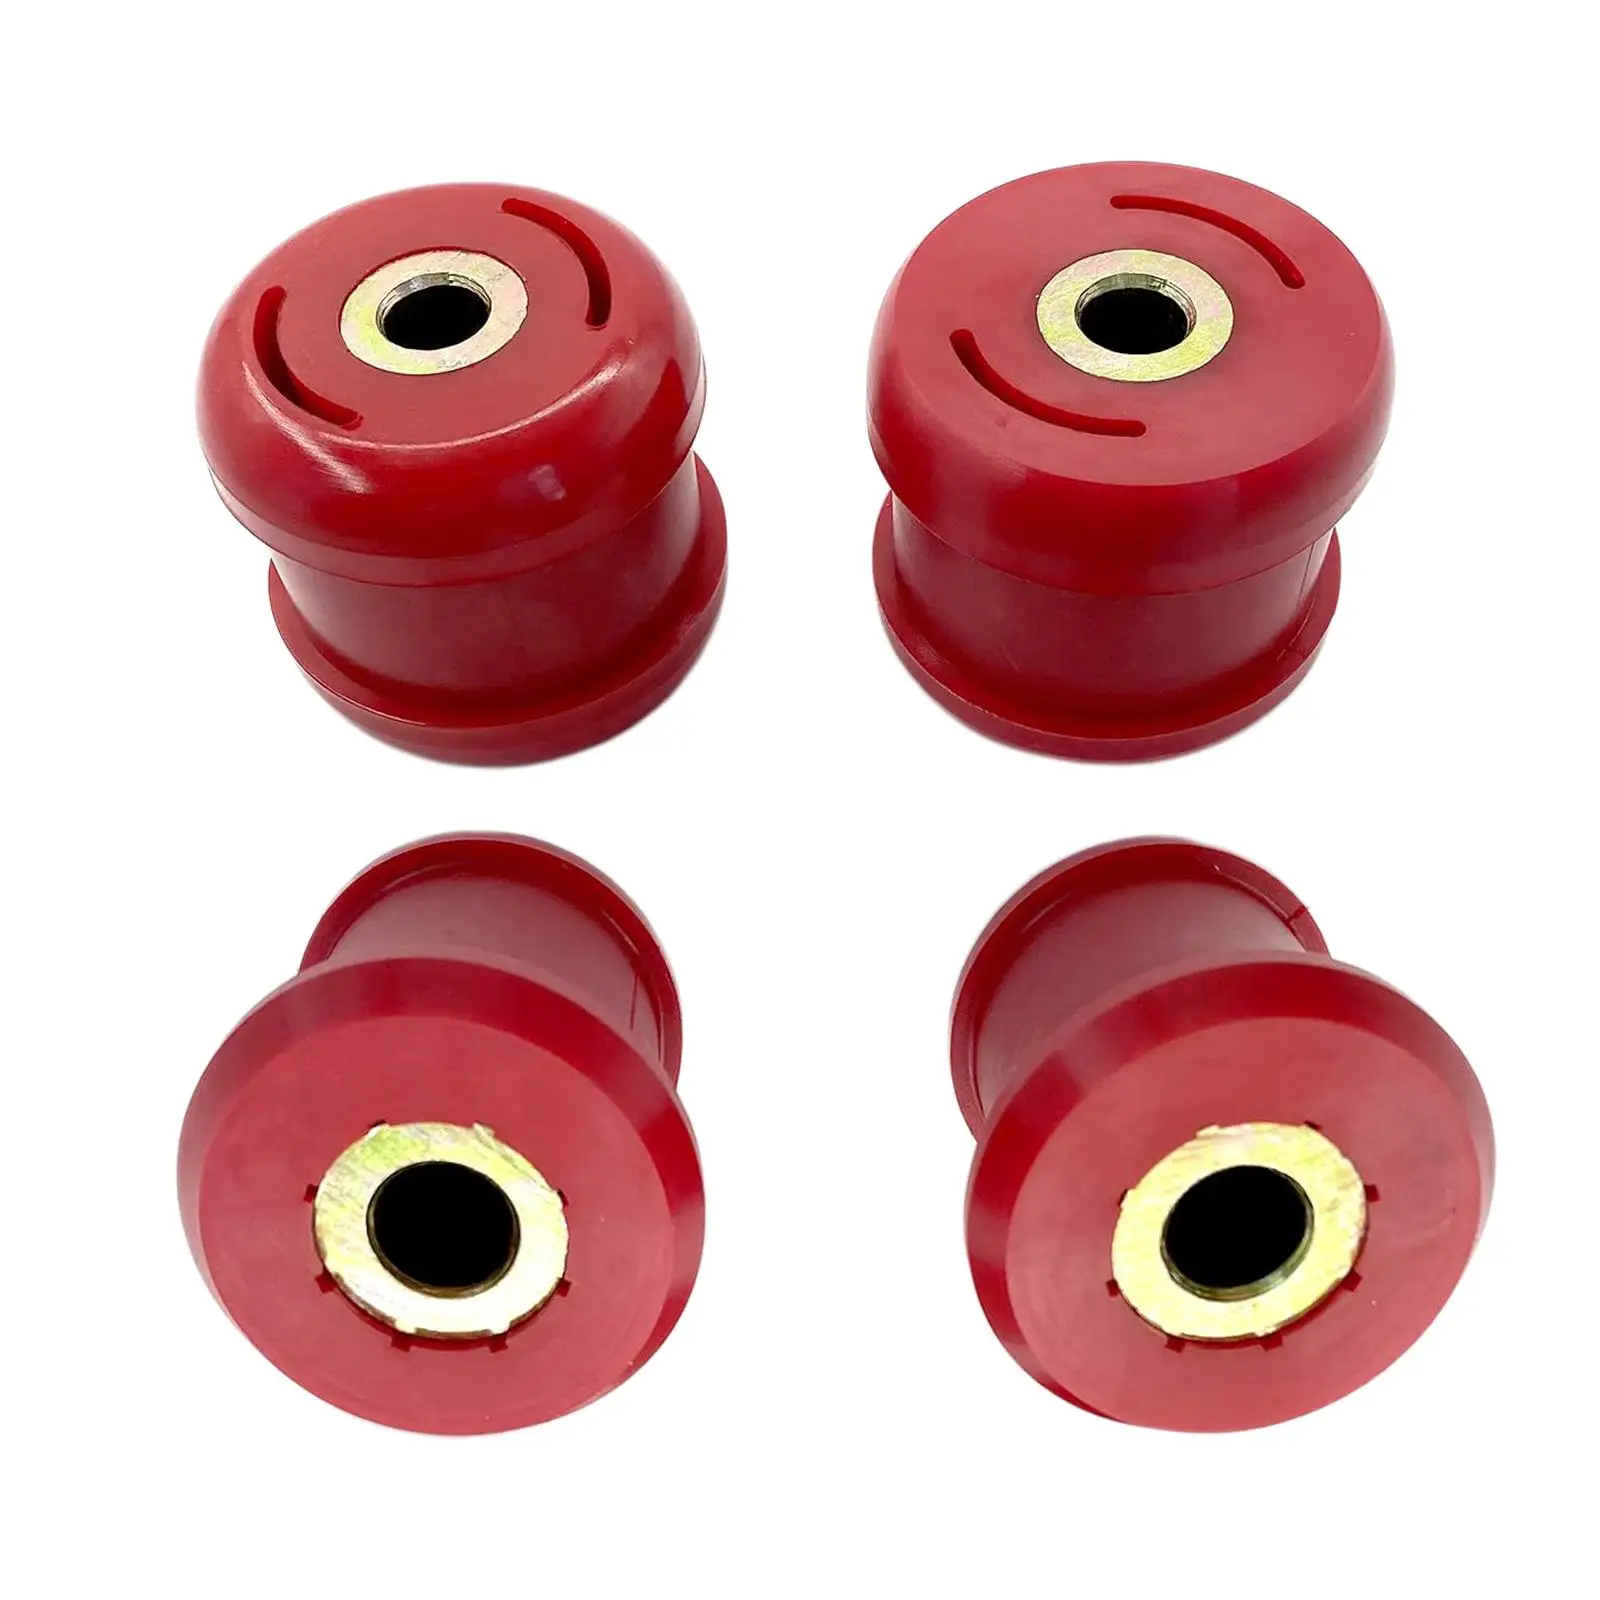 4x Front Lower Control Arm Bushing Car Accessories High performance Parts Red Bbj-Hd1-402F-Rd-839-D0 8-215 for RSX